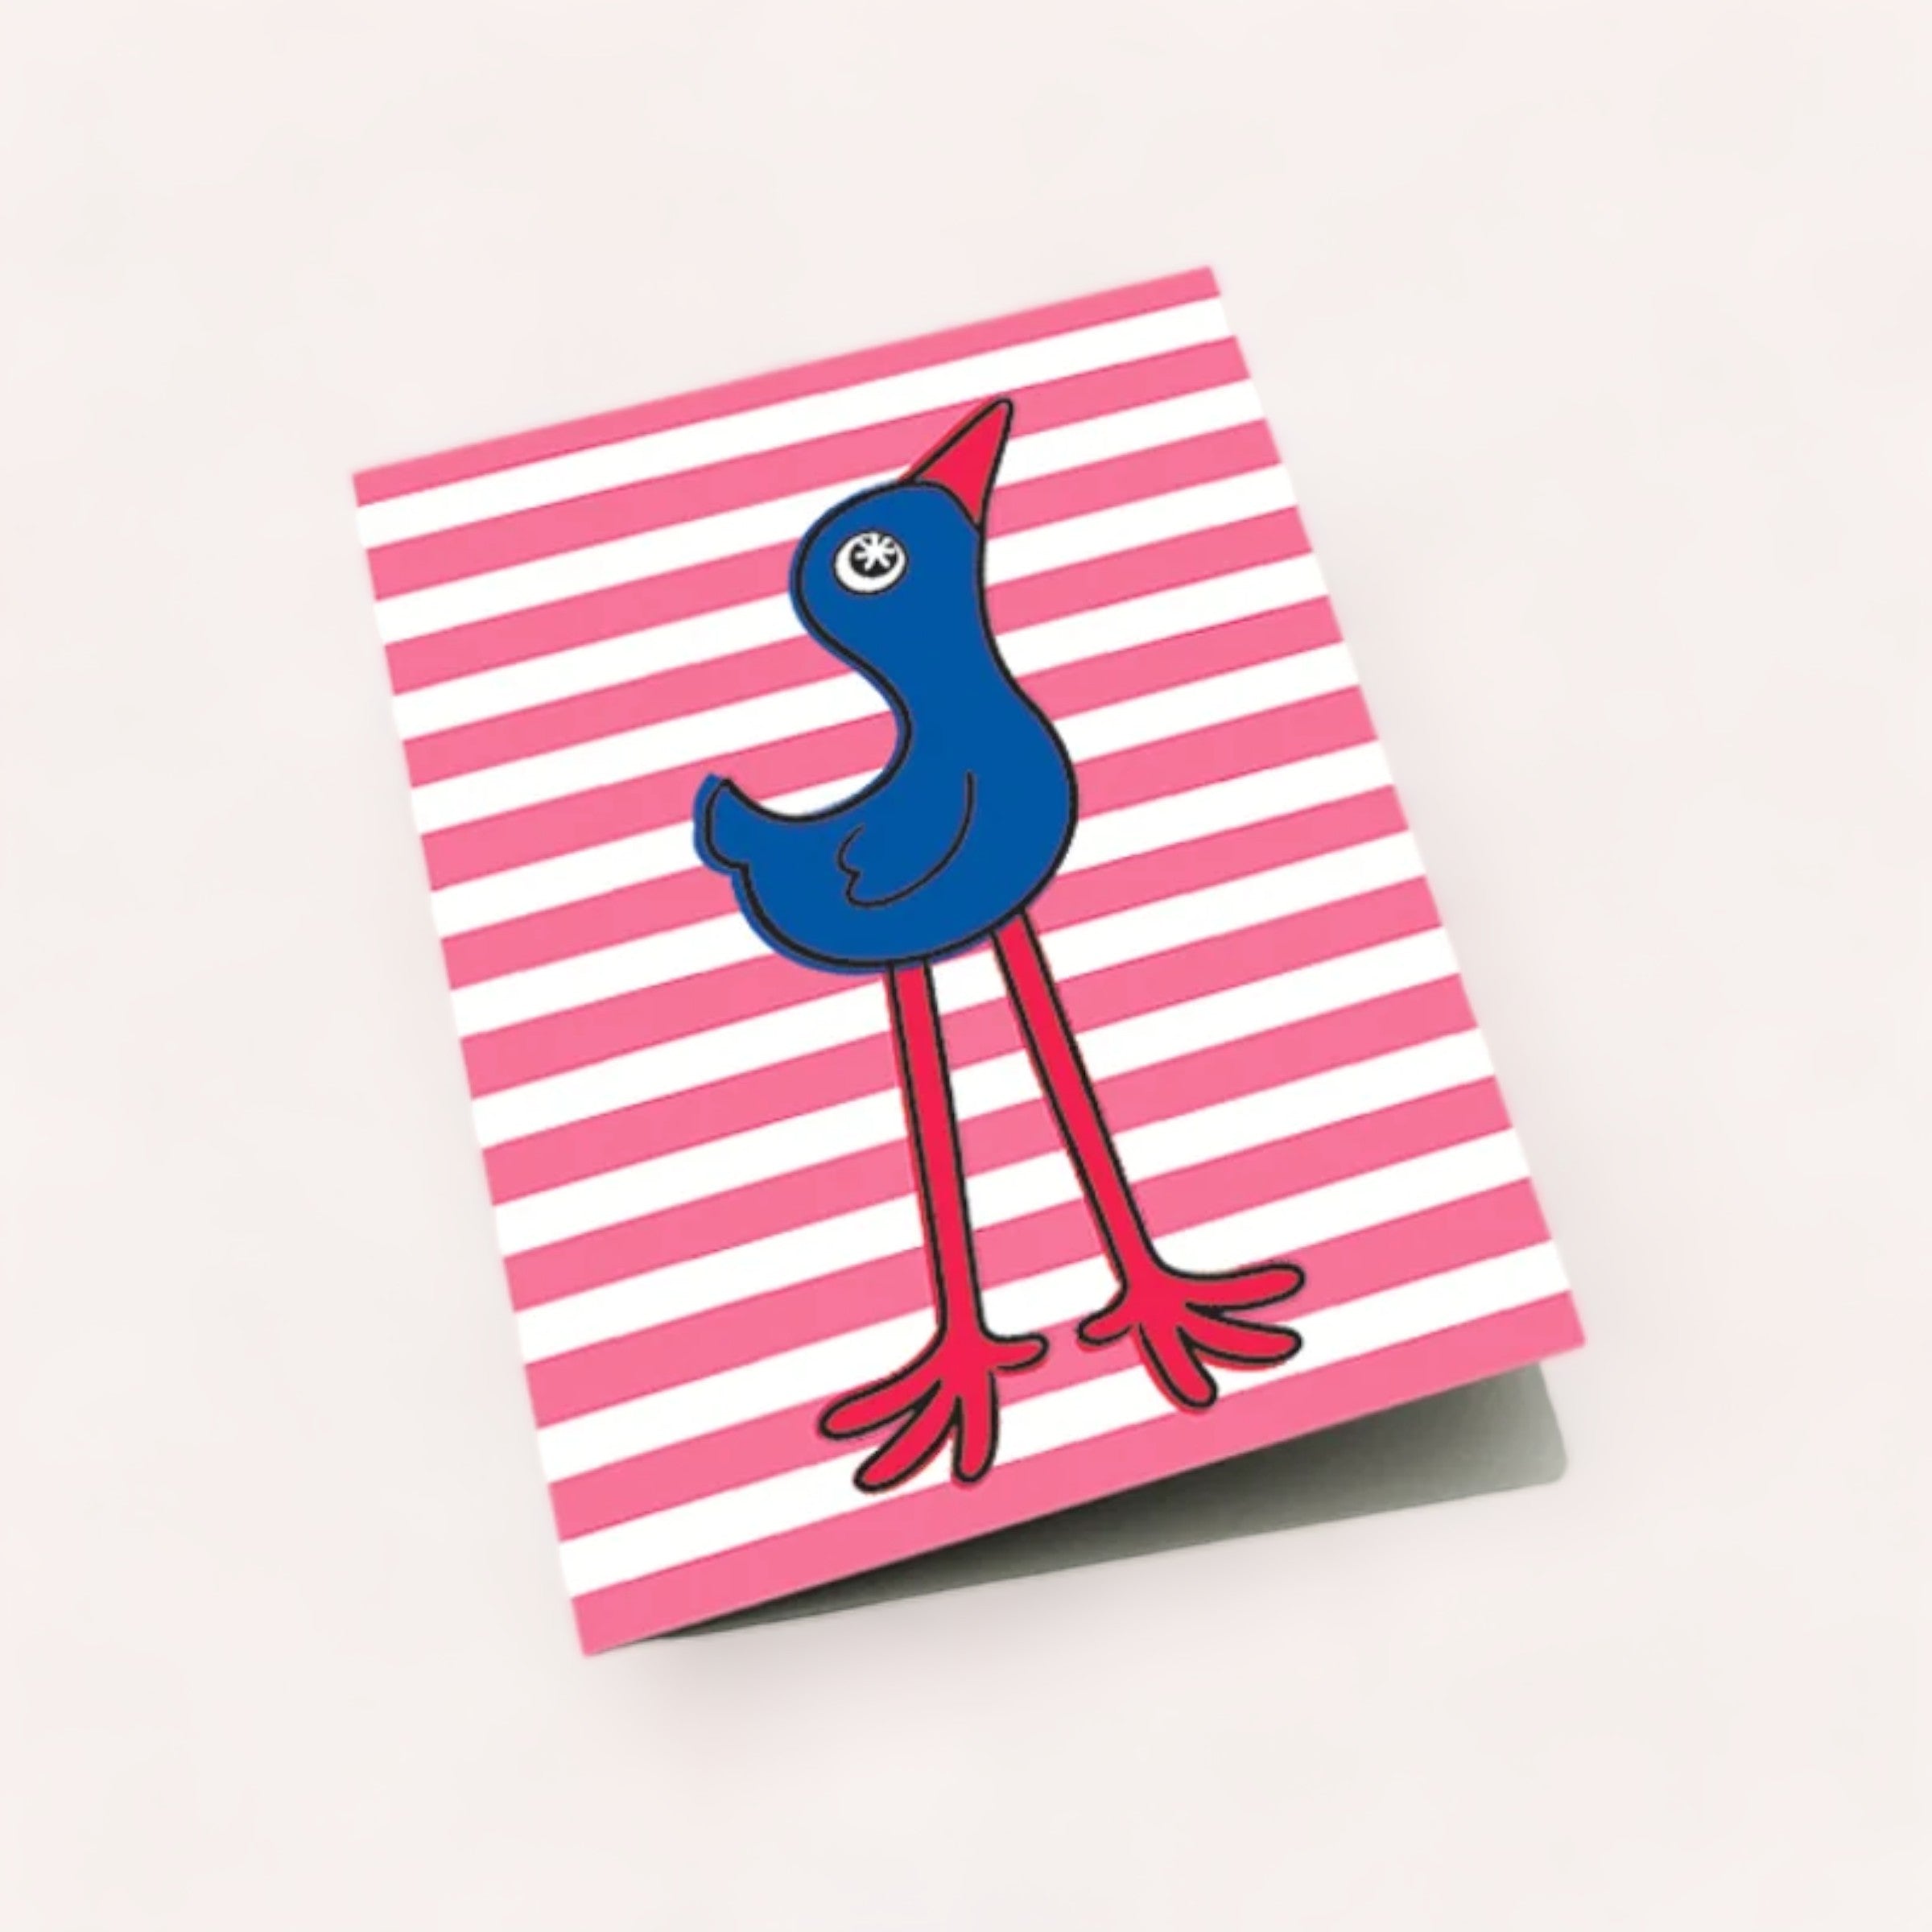 A playful illustration of a Pukeko Buddy on a pink and white striped background, adorning a quirky greeting card or notebook cover, part of a multibuy Design by Leonard selection.